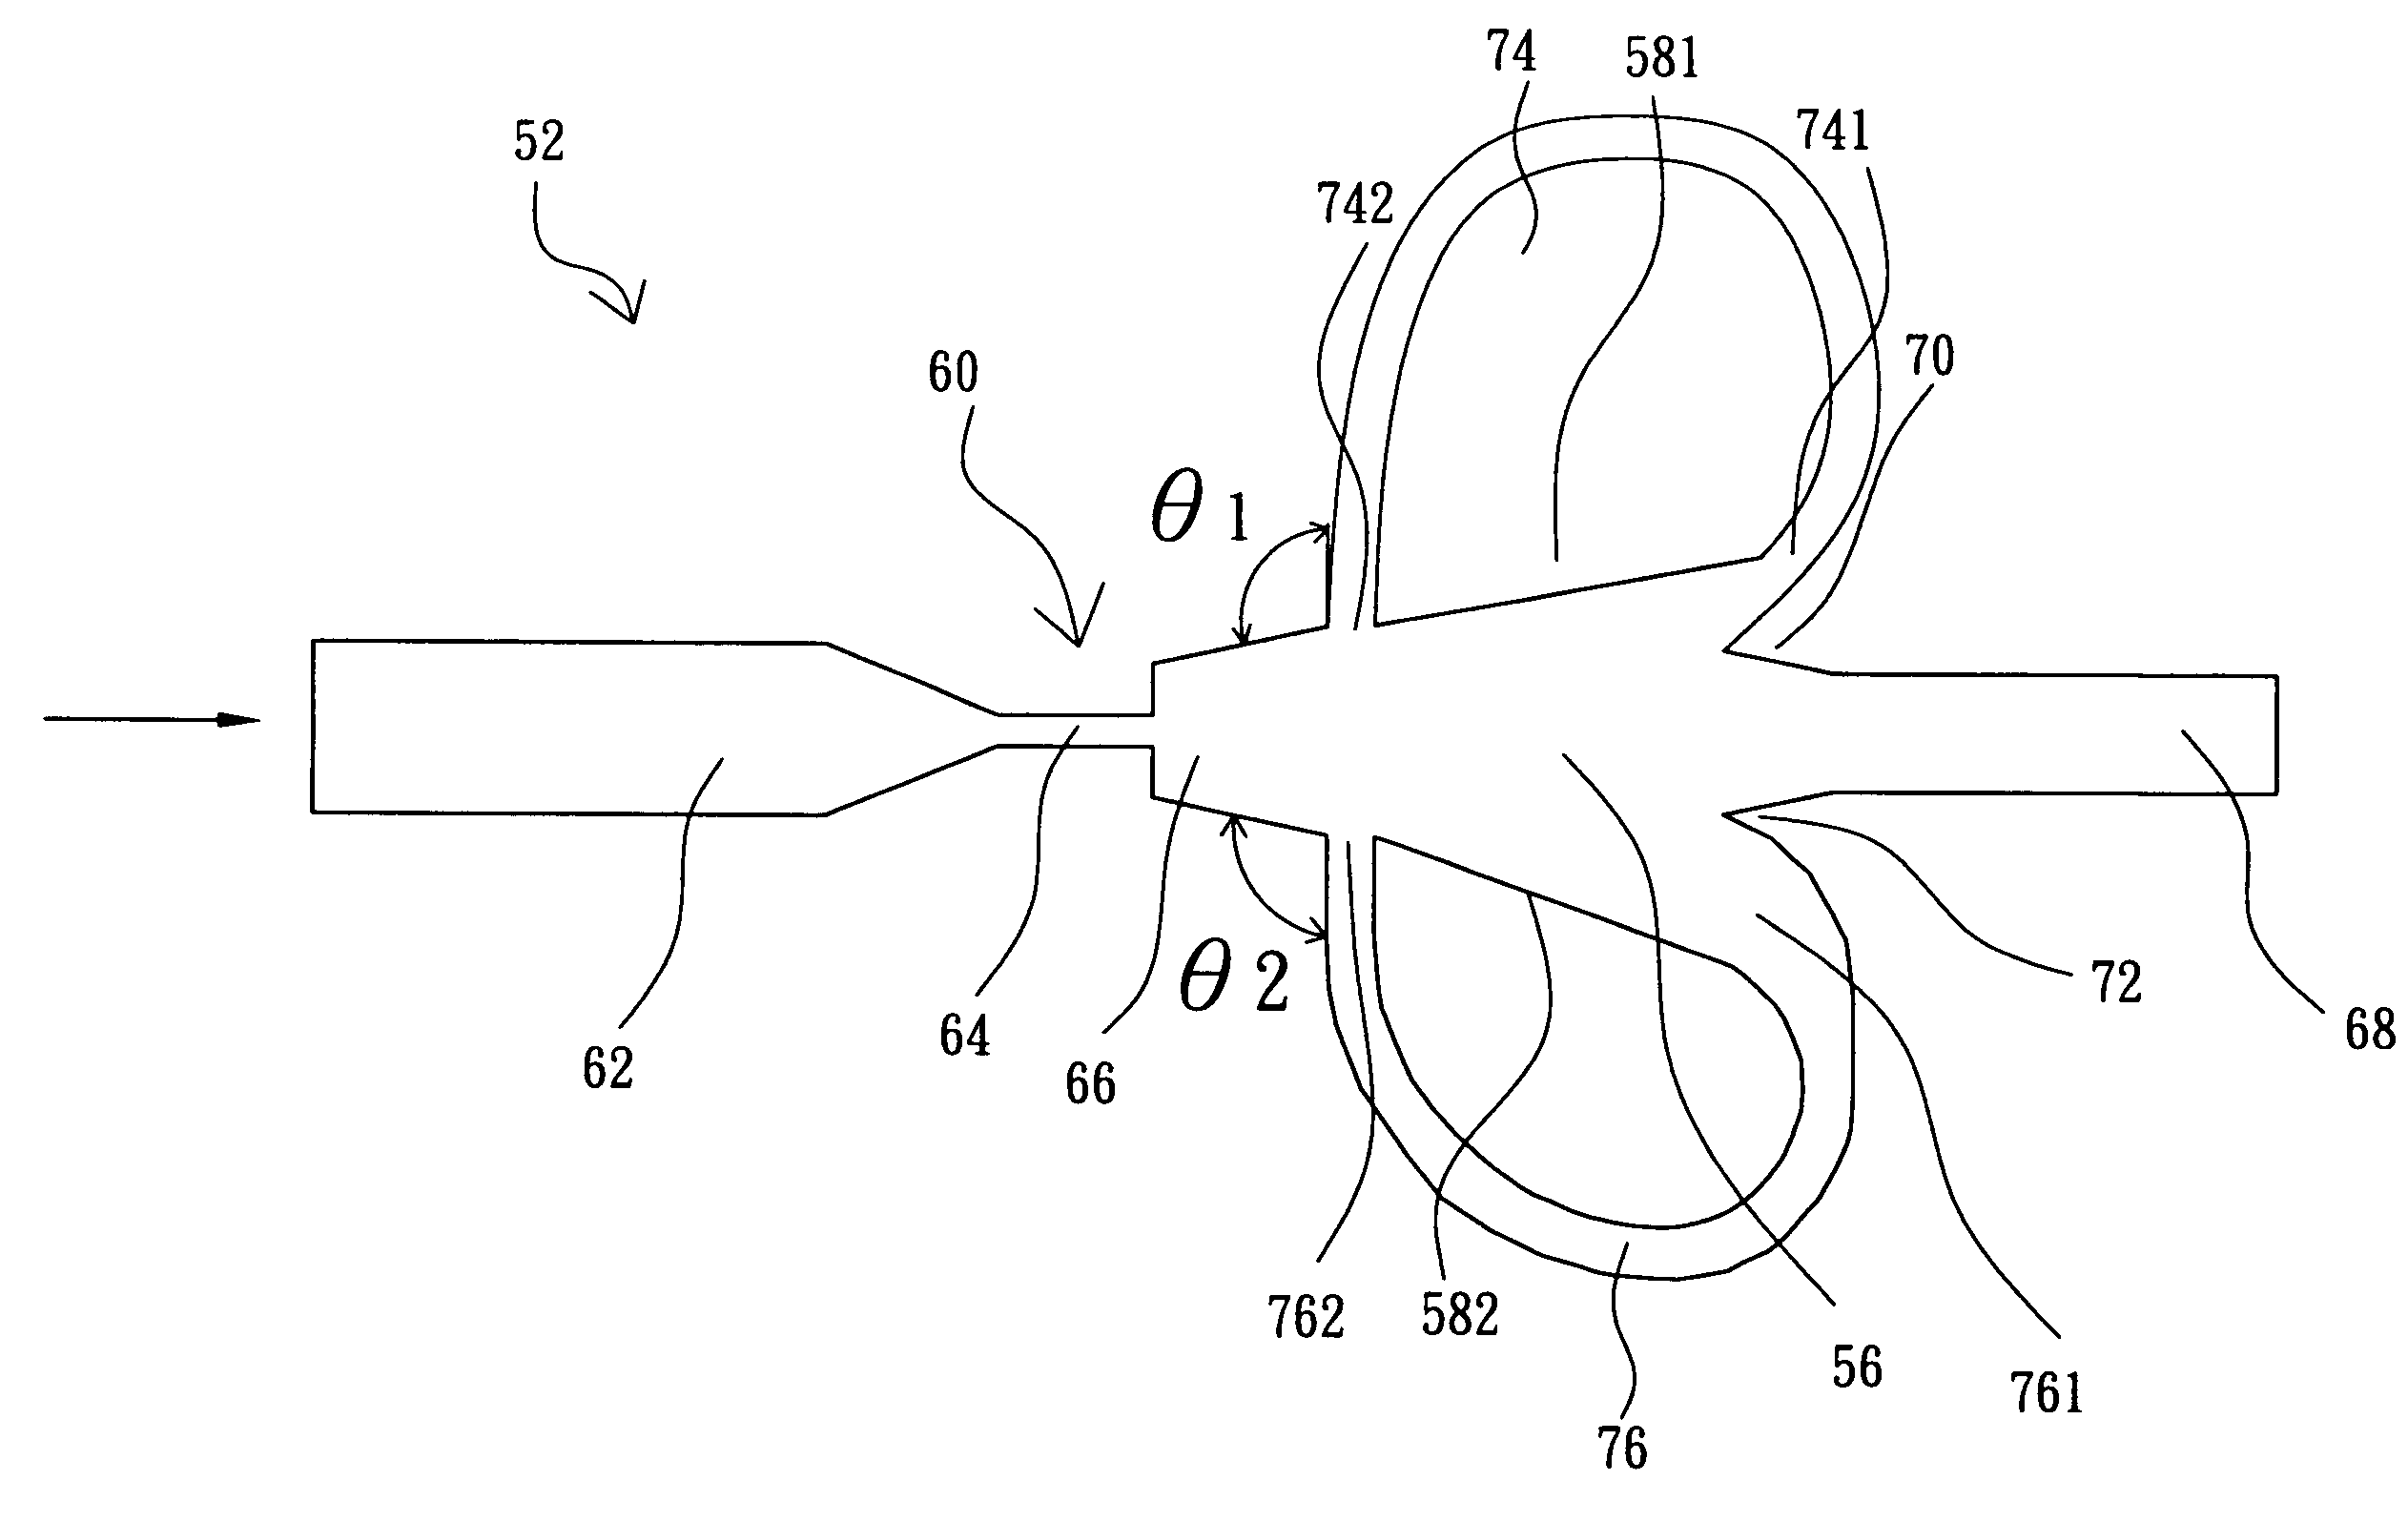 Micro-fluidic oscillator having a sudden expansion region at the nozzle outlet